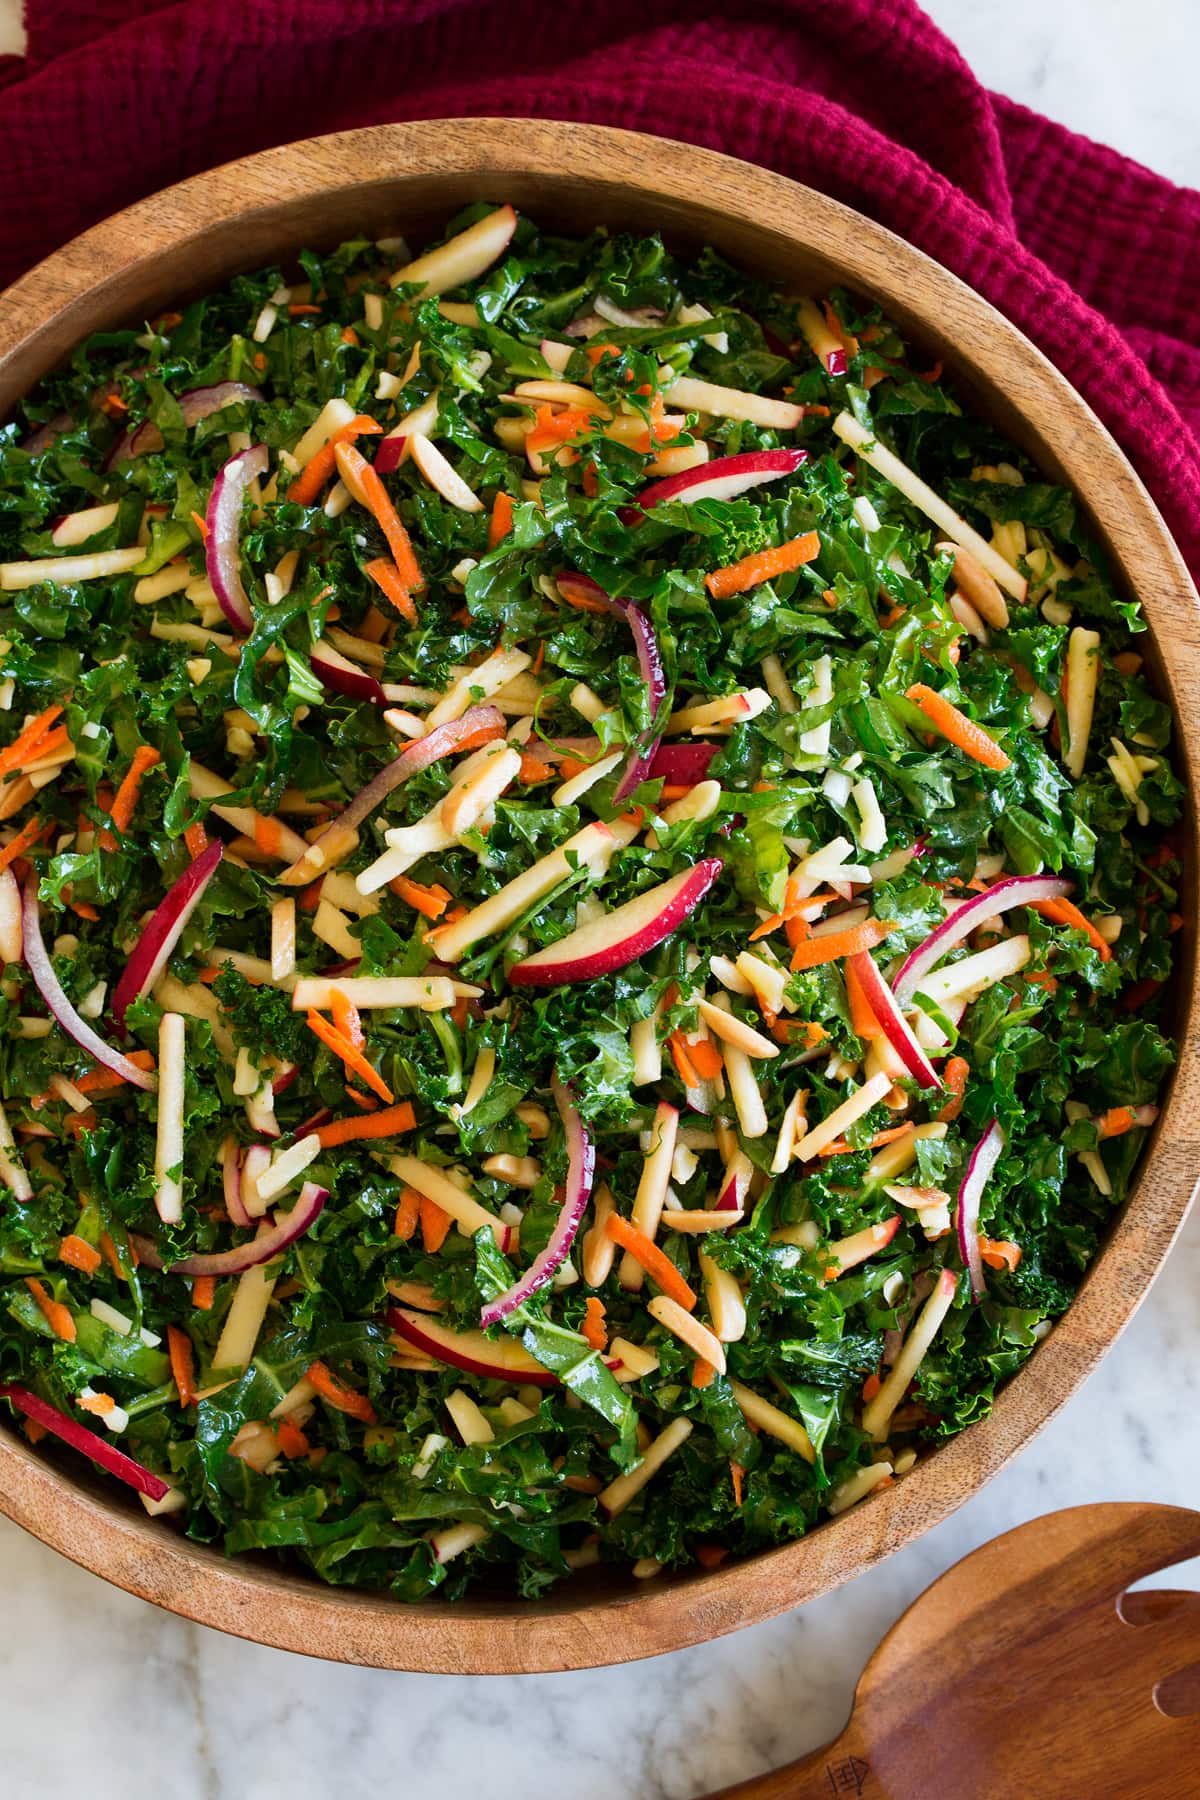 Photo: Kale salad shown from above.